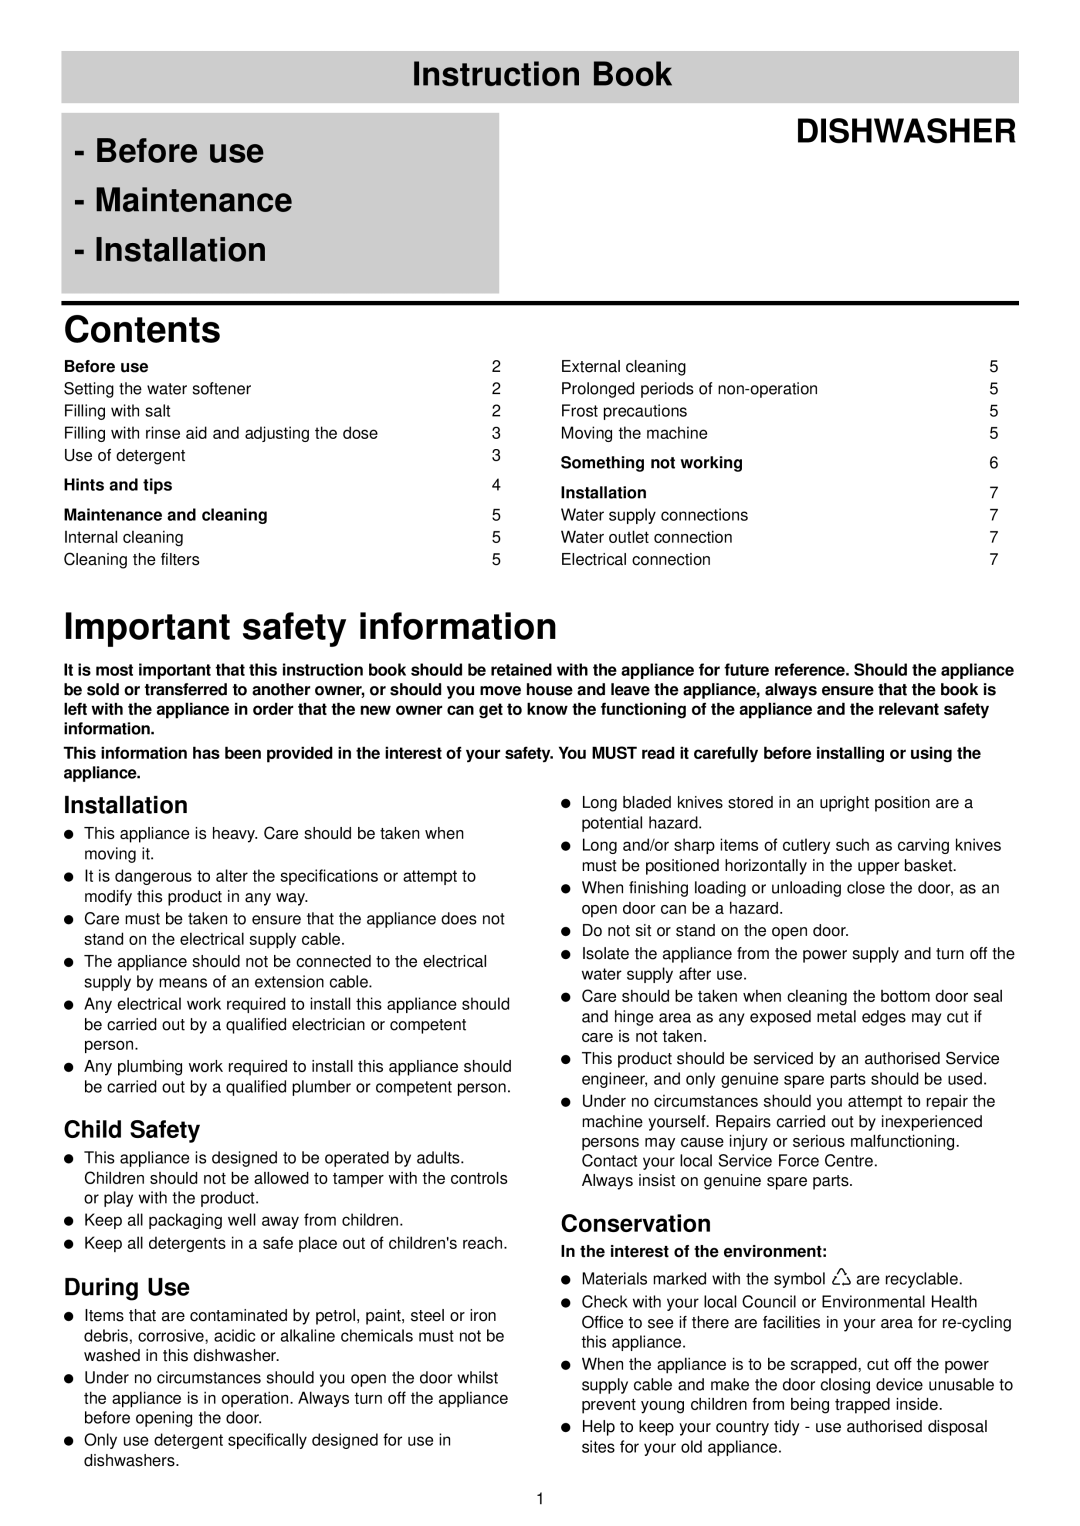 Zanussi DA 4142 Contents, Important safety information, Installation, Child Safety, During Use, Conservation, Before use 